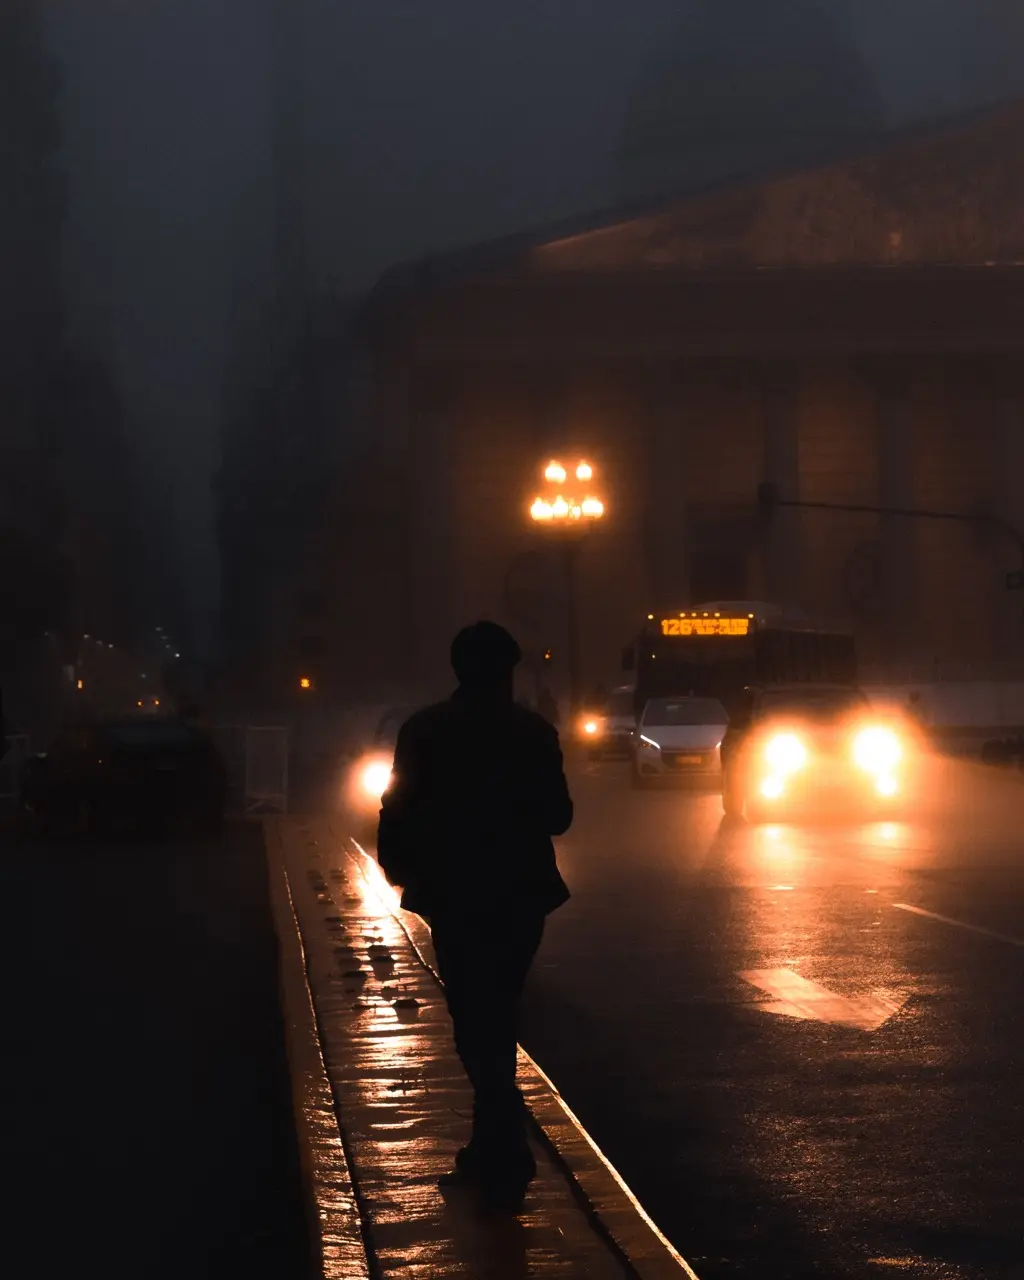 A person walking along a wet street at night